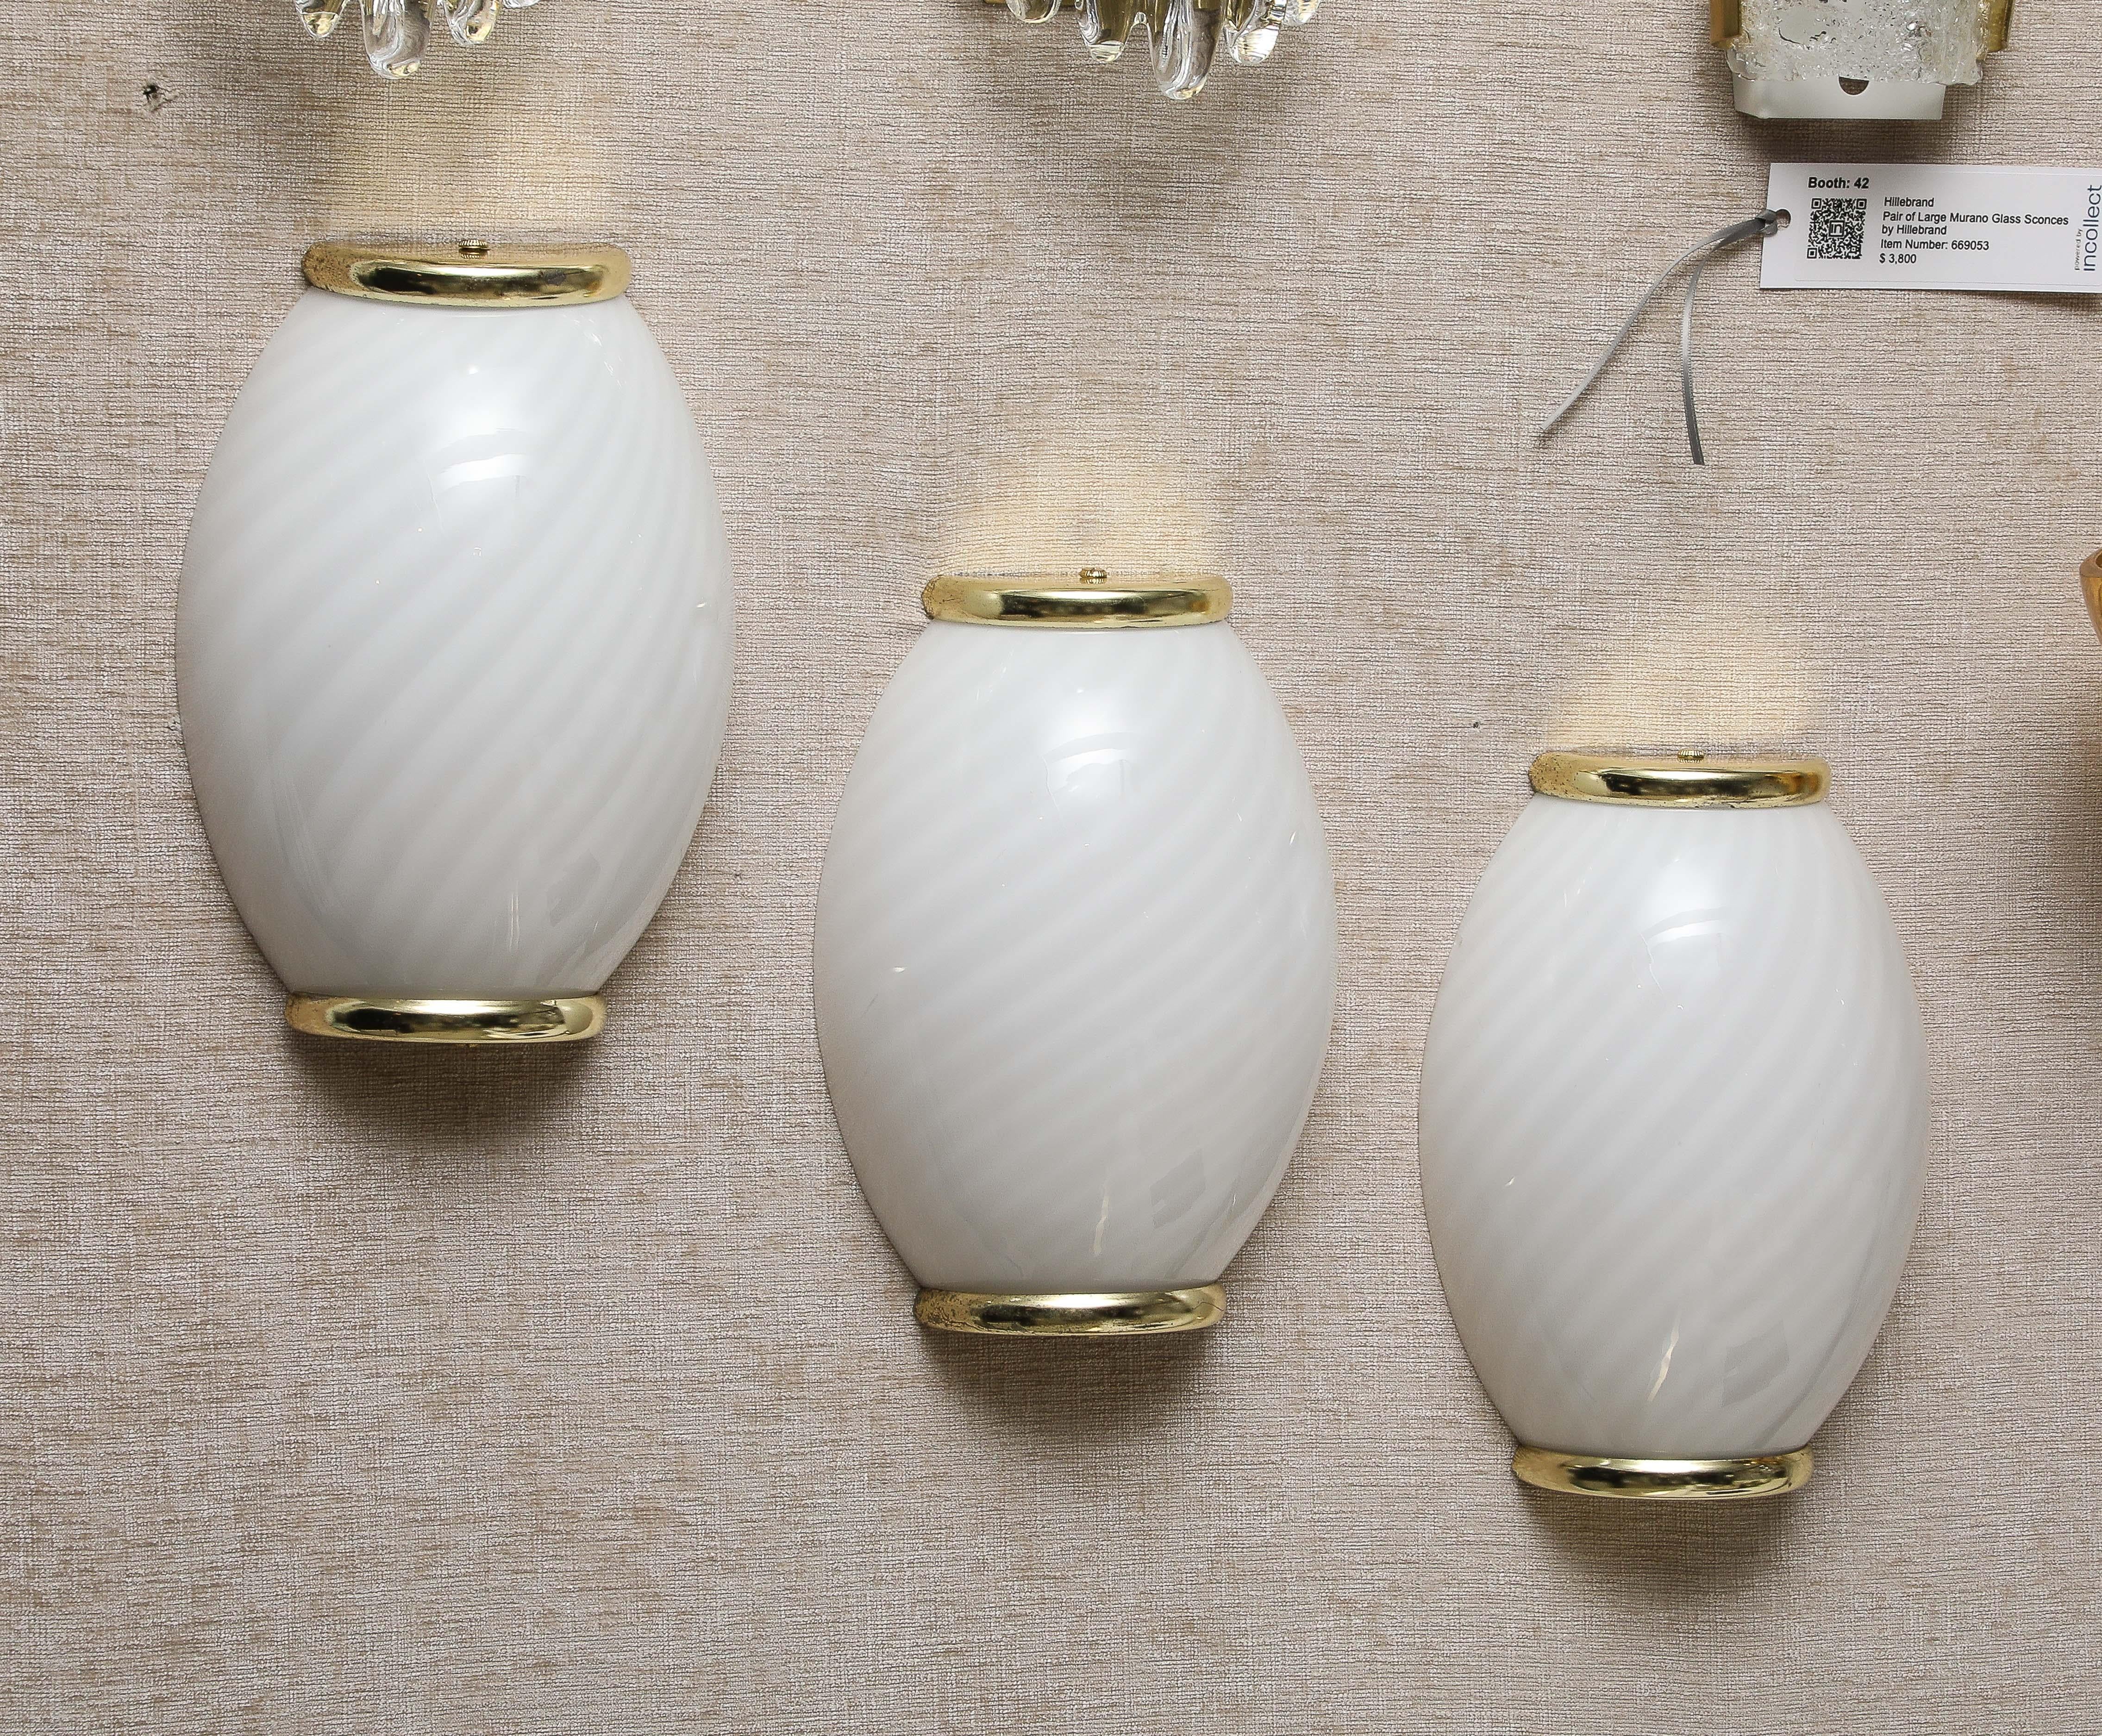 Set of Three Striped Murano Glass and Brass sconces by Fabbian.
The sconces have been Newly rewired for the US and they take a standard Candelabra light bulb  with a Maximum 60 watts